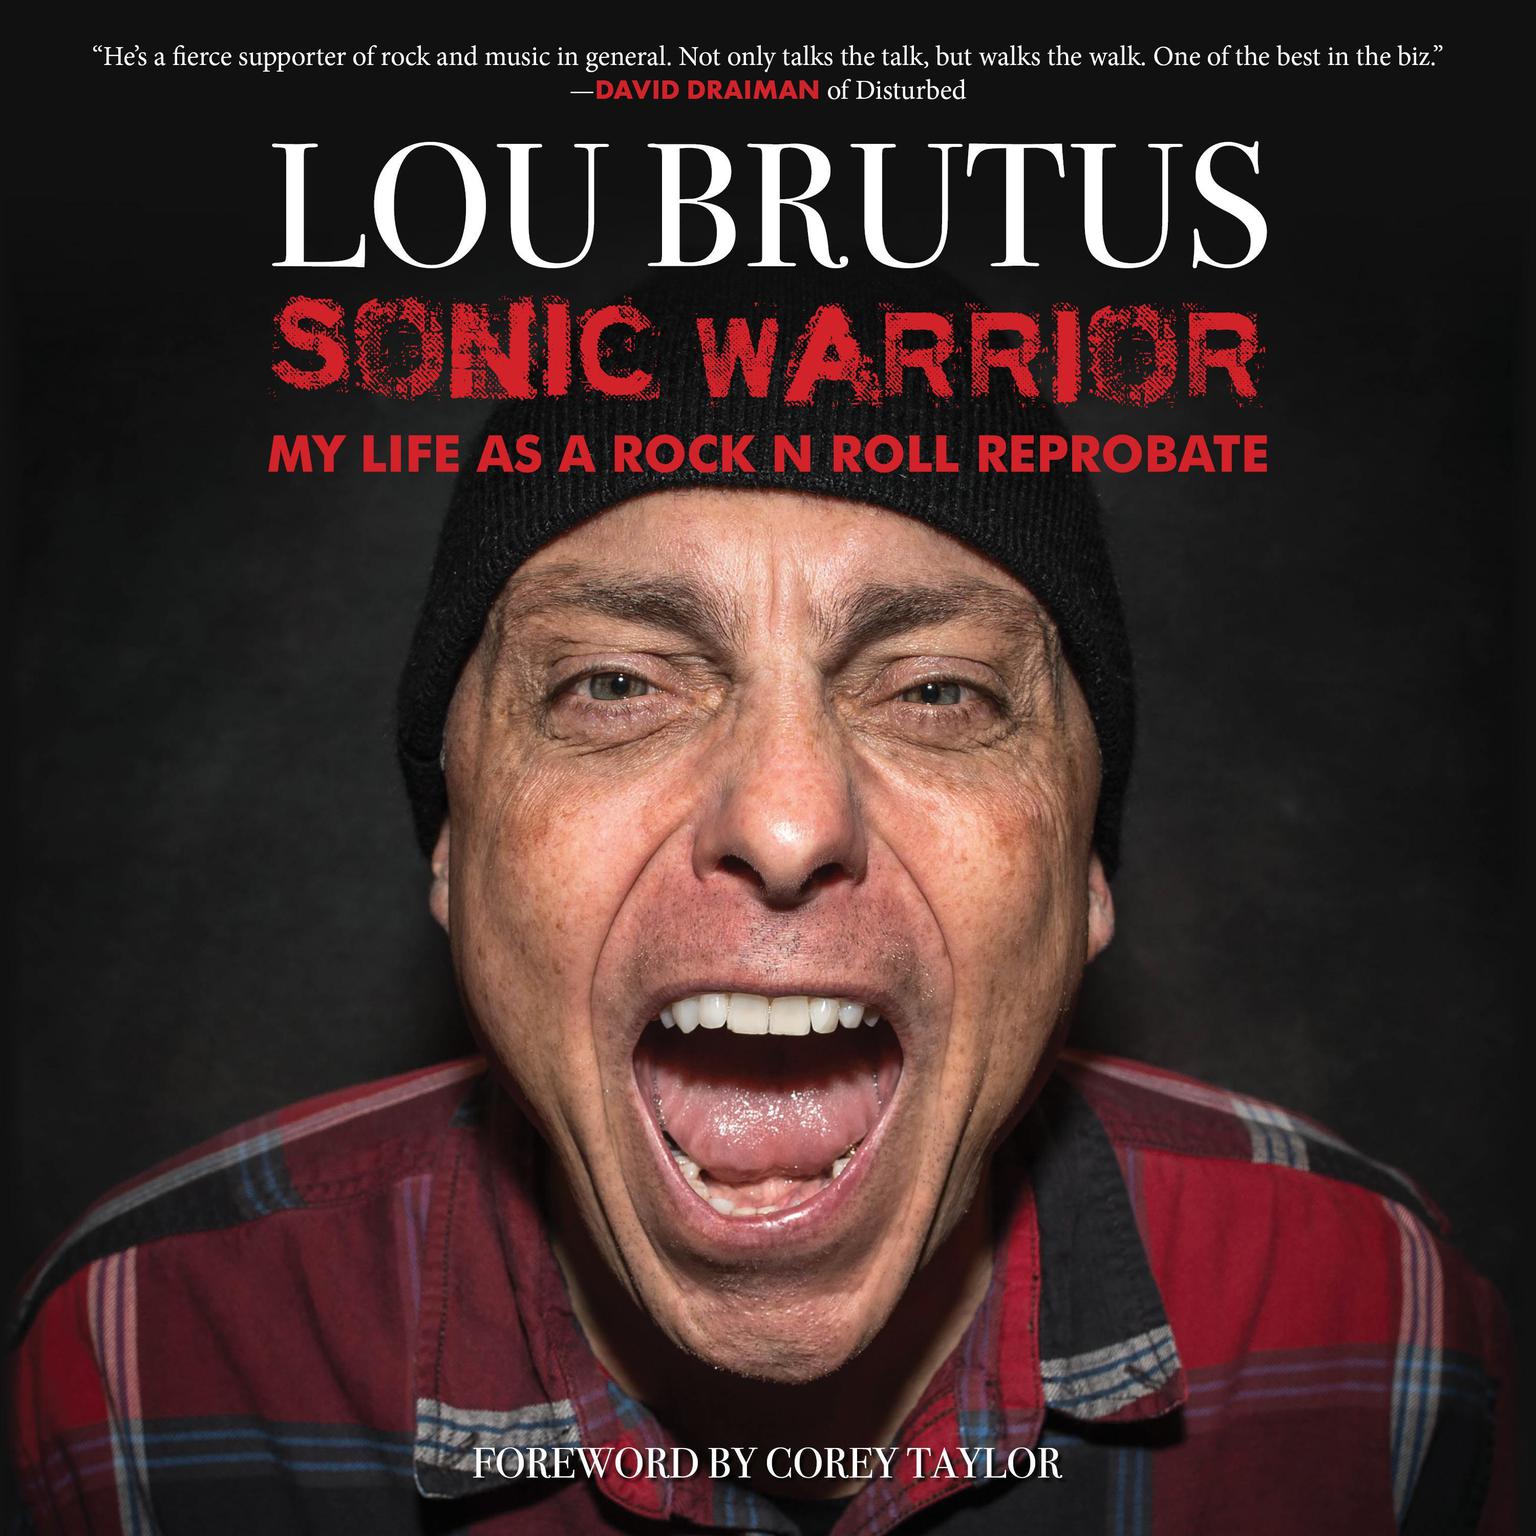 Sonic Warrior: My Life as a Rock N Roll Reprobate: Tales of Sex, Drugs, and Vomiting at Inopportune Moments Audiobook, by Lou Brutus